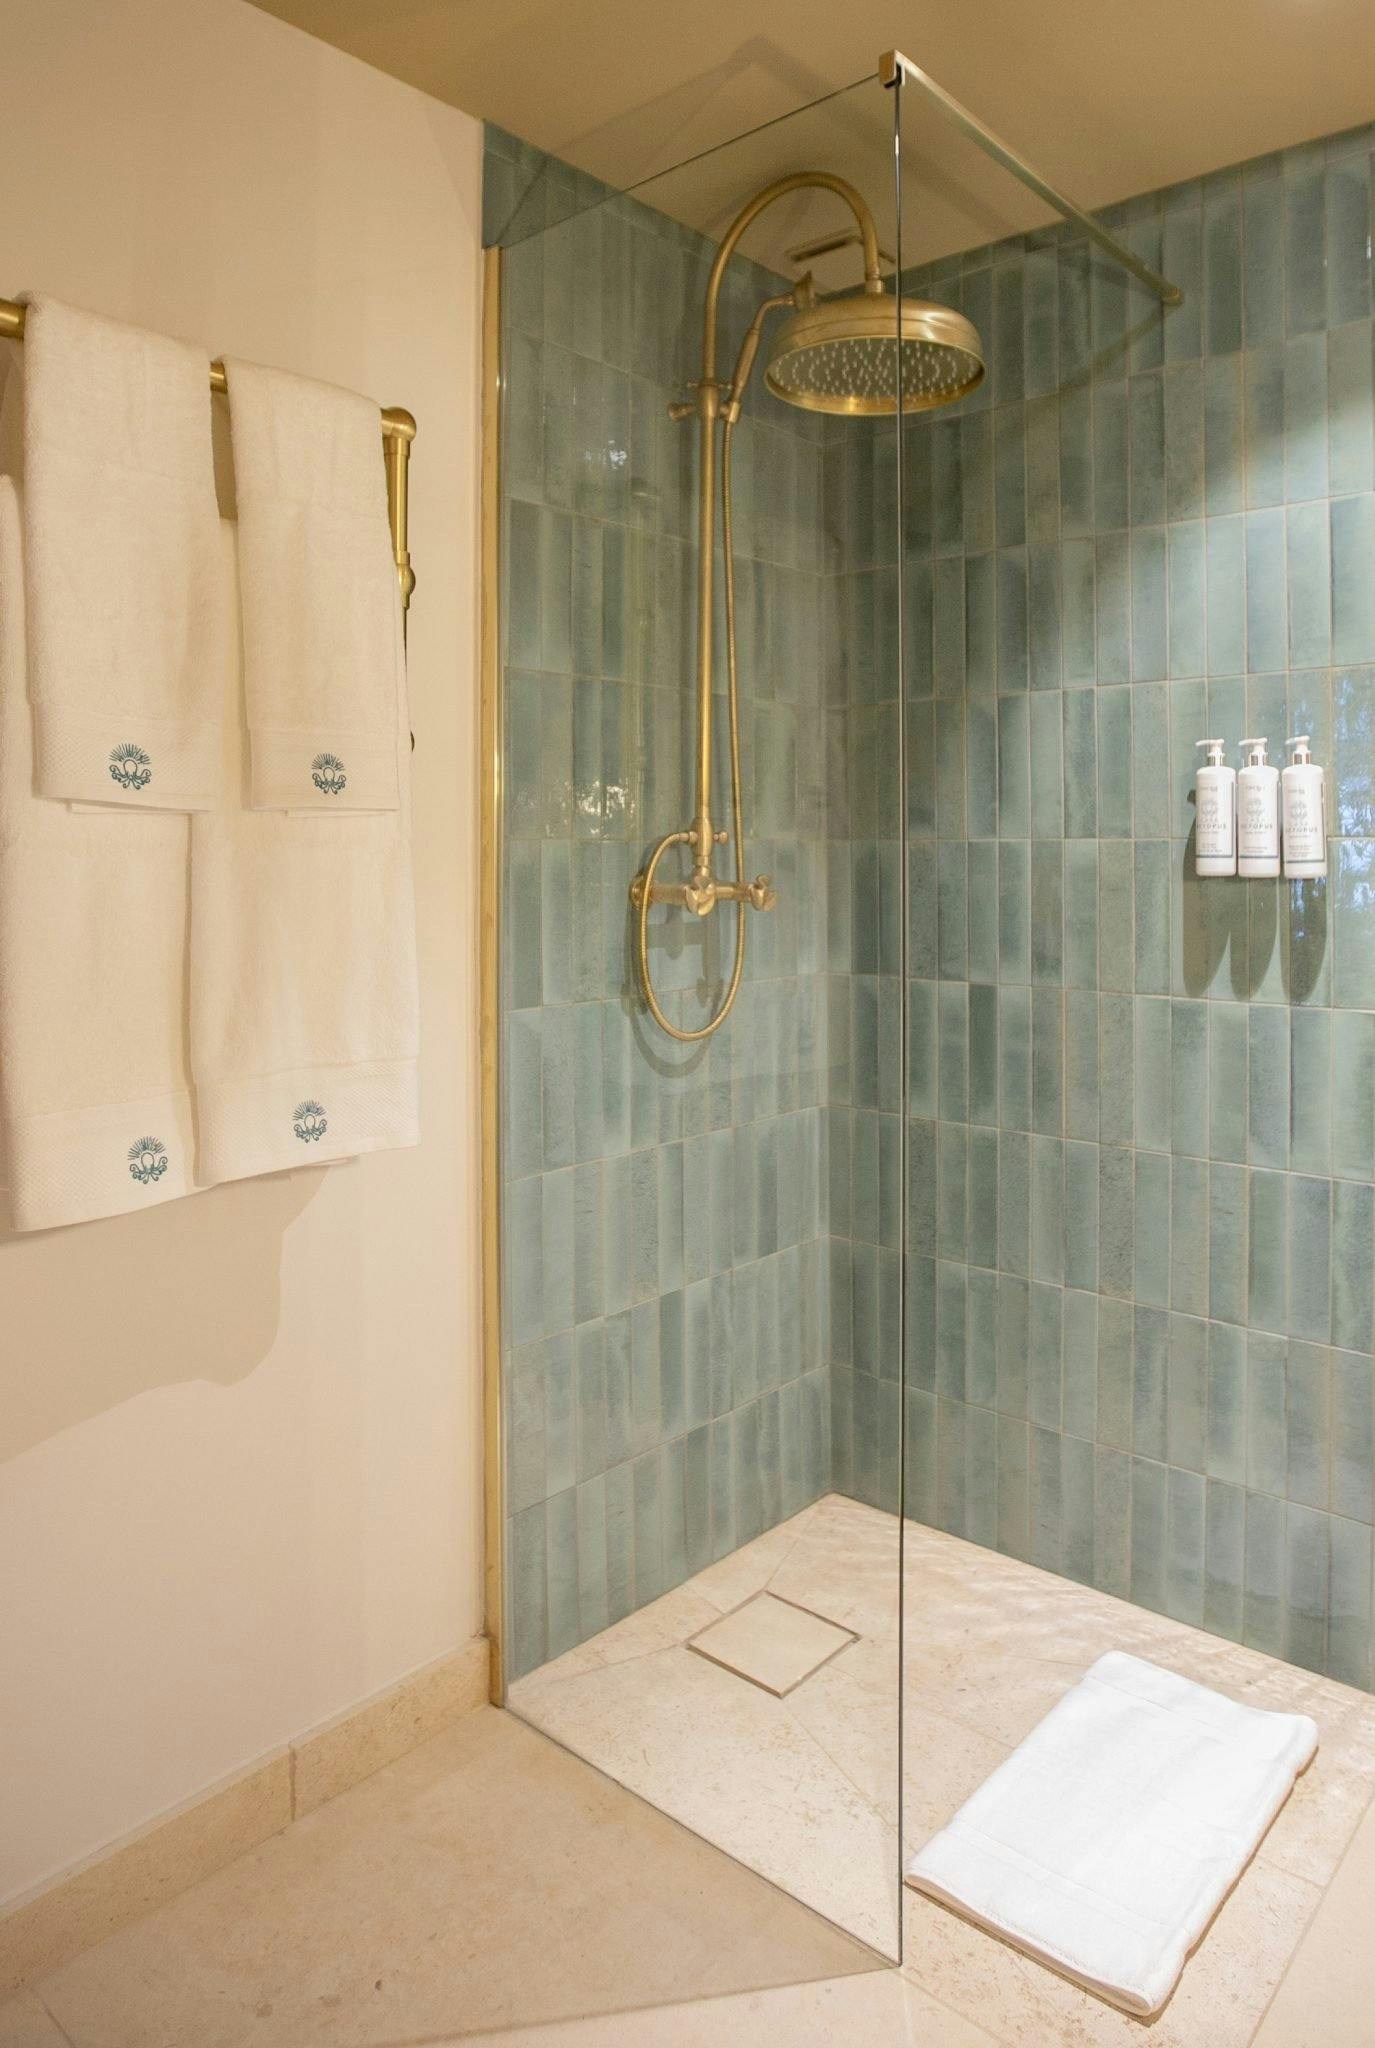 Shower decorated with green zelliges and gold elements